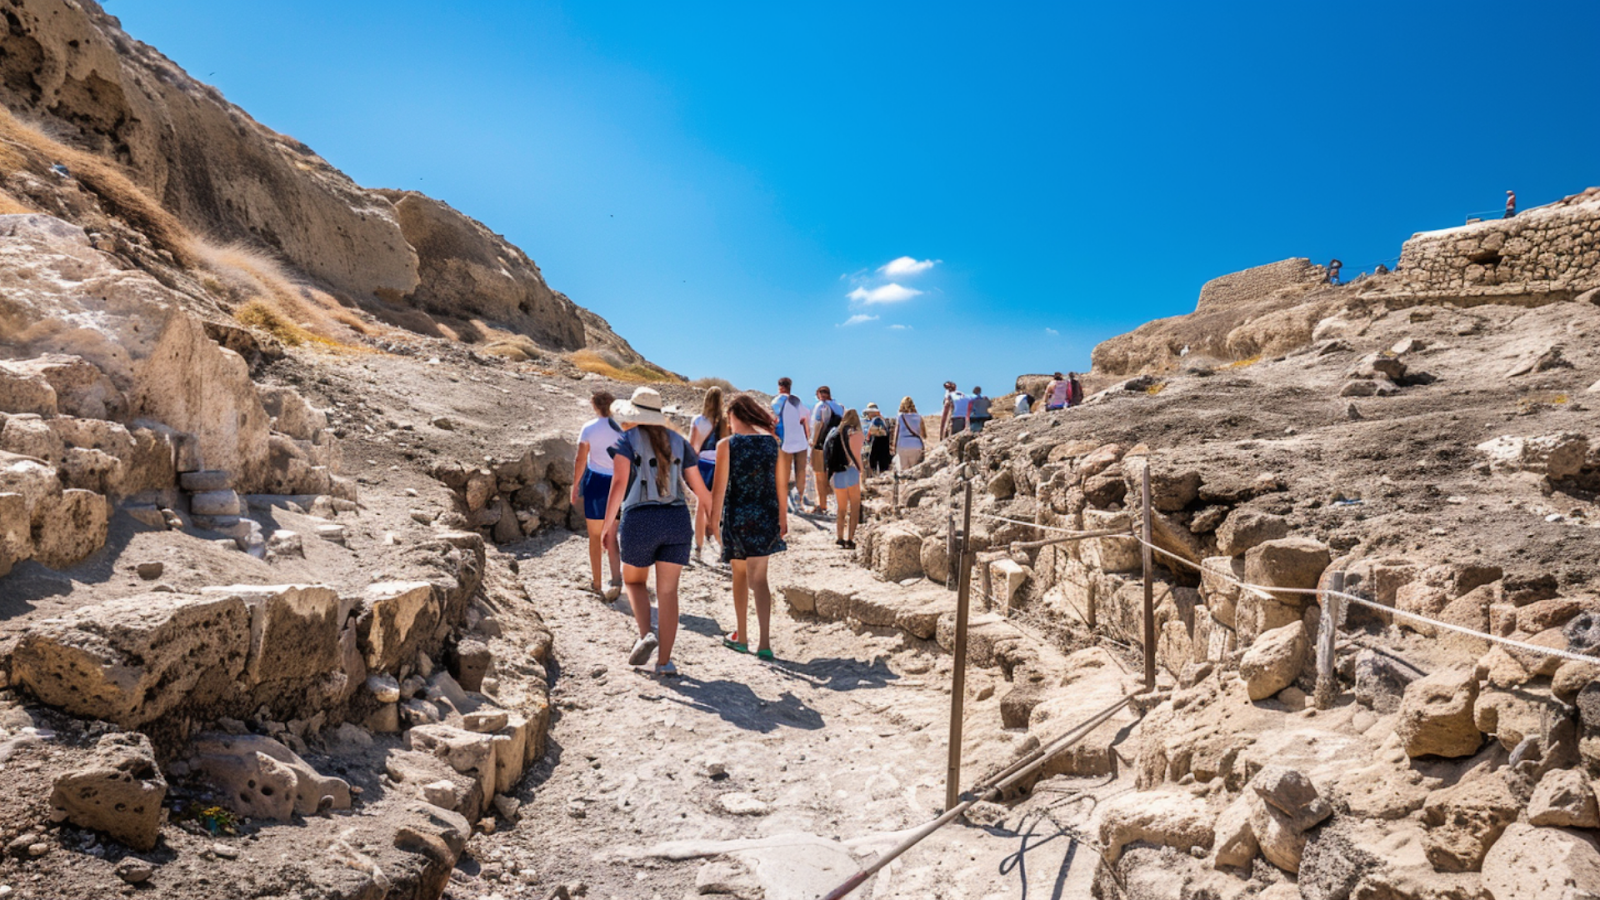 People exploring the Akrotiri Archaeological Site, a must-see attraction in Santorini